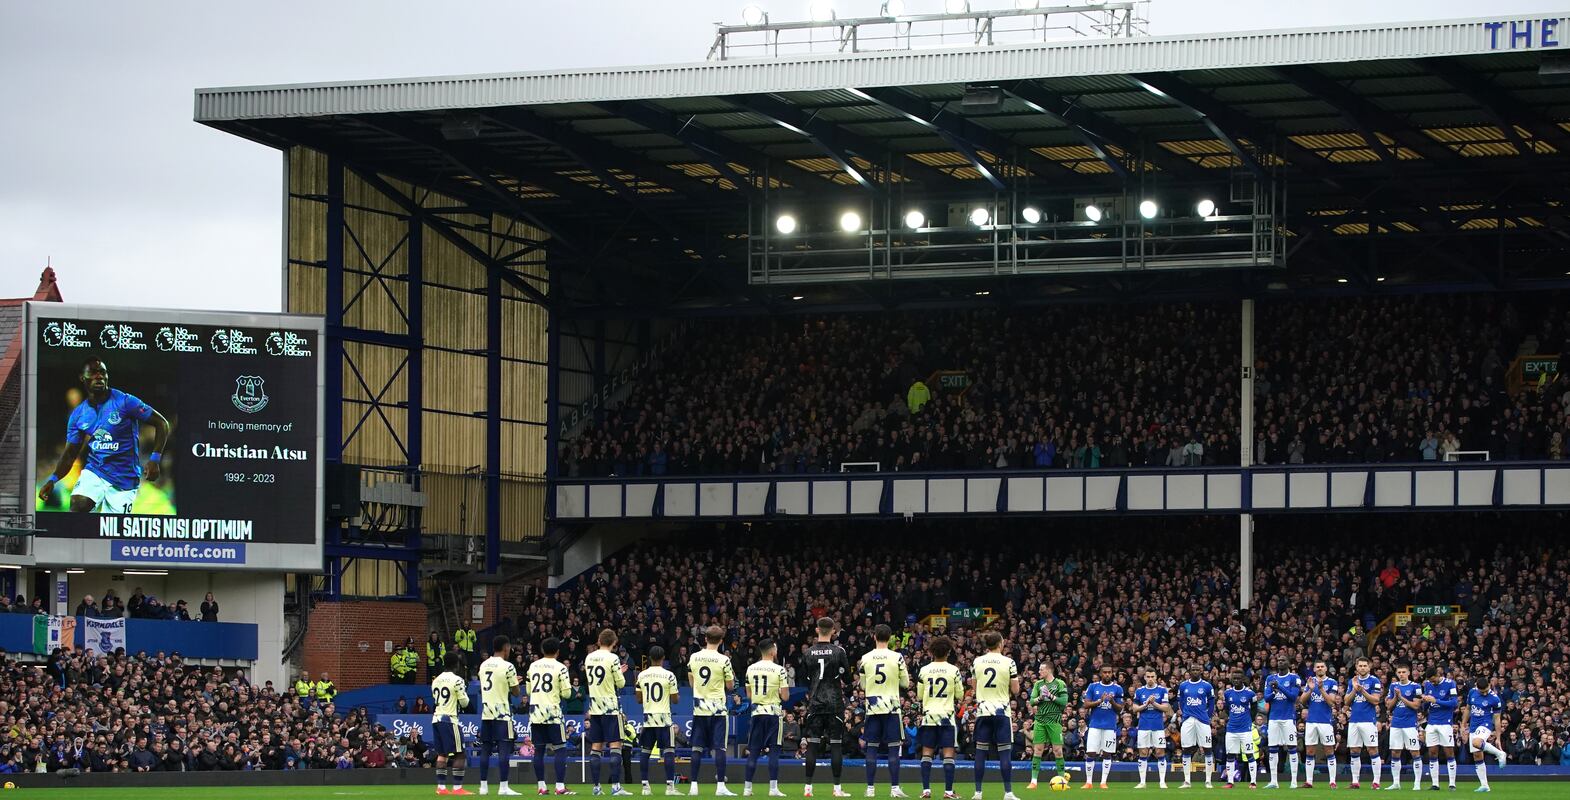 Players pay tribute to Christian Atsu who has died following the devastating earthquake that hit Turkey,the Premier League match at Goodison Park, Liverpool. Picture date: Saturday February 18, 2023.